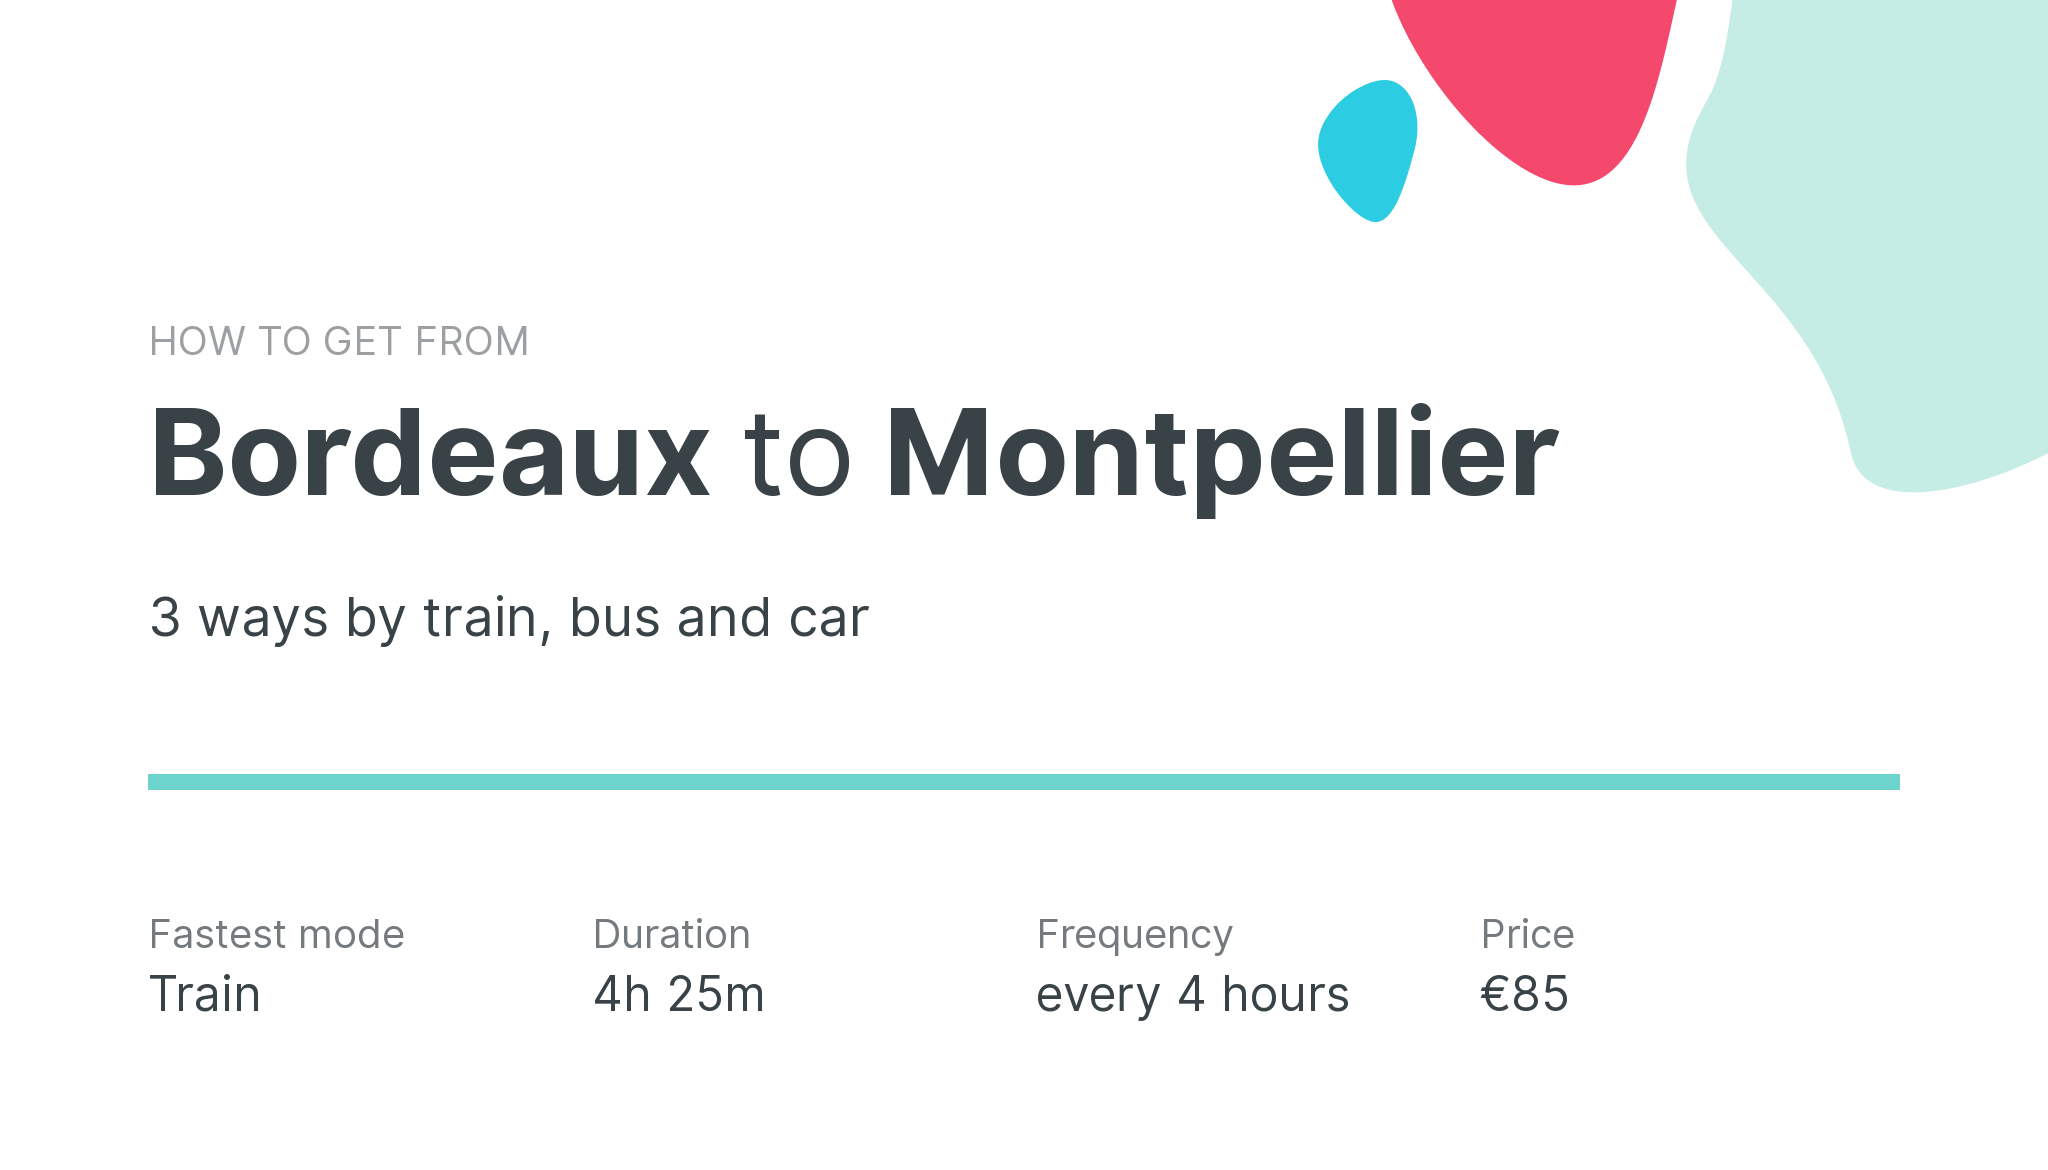 How do I get from Bordeaux to Montpellier